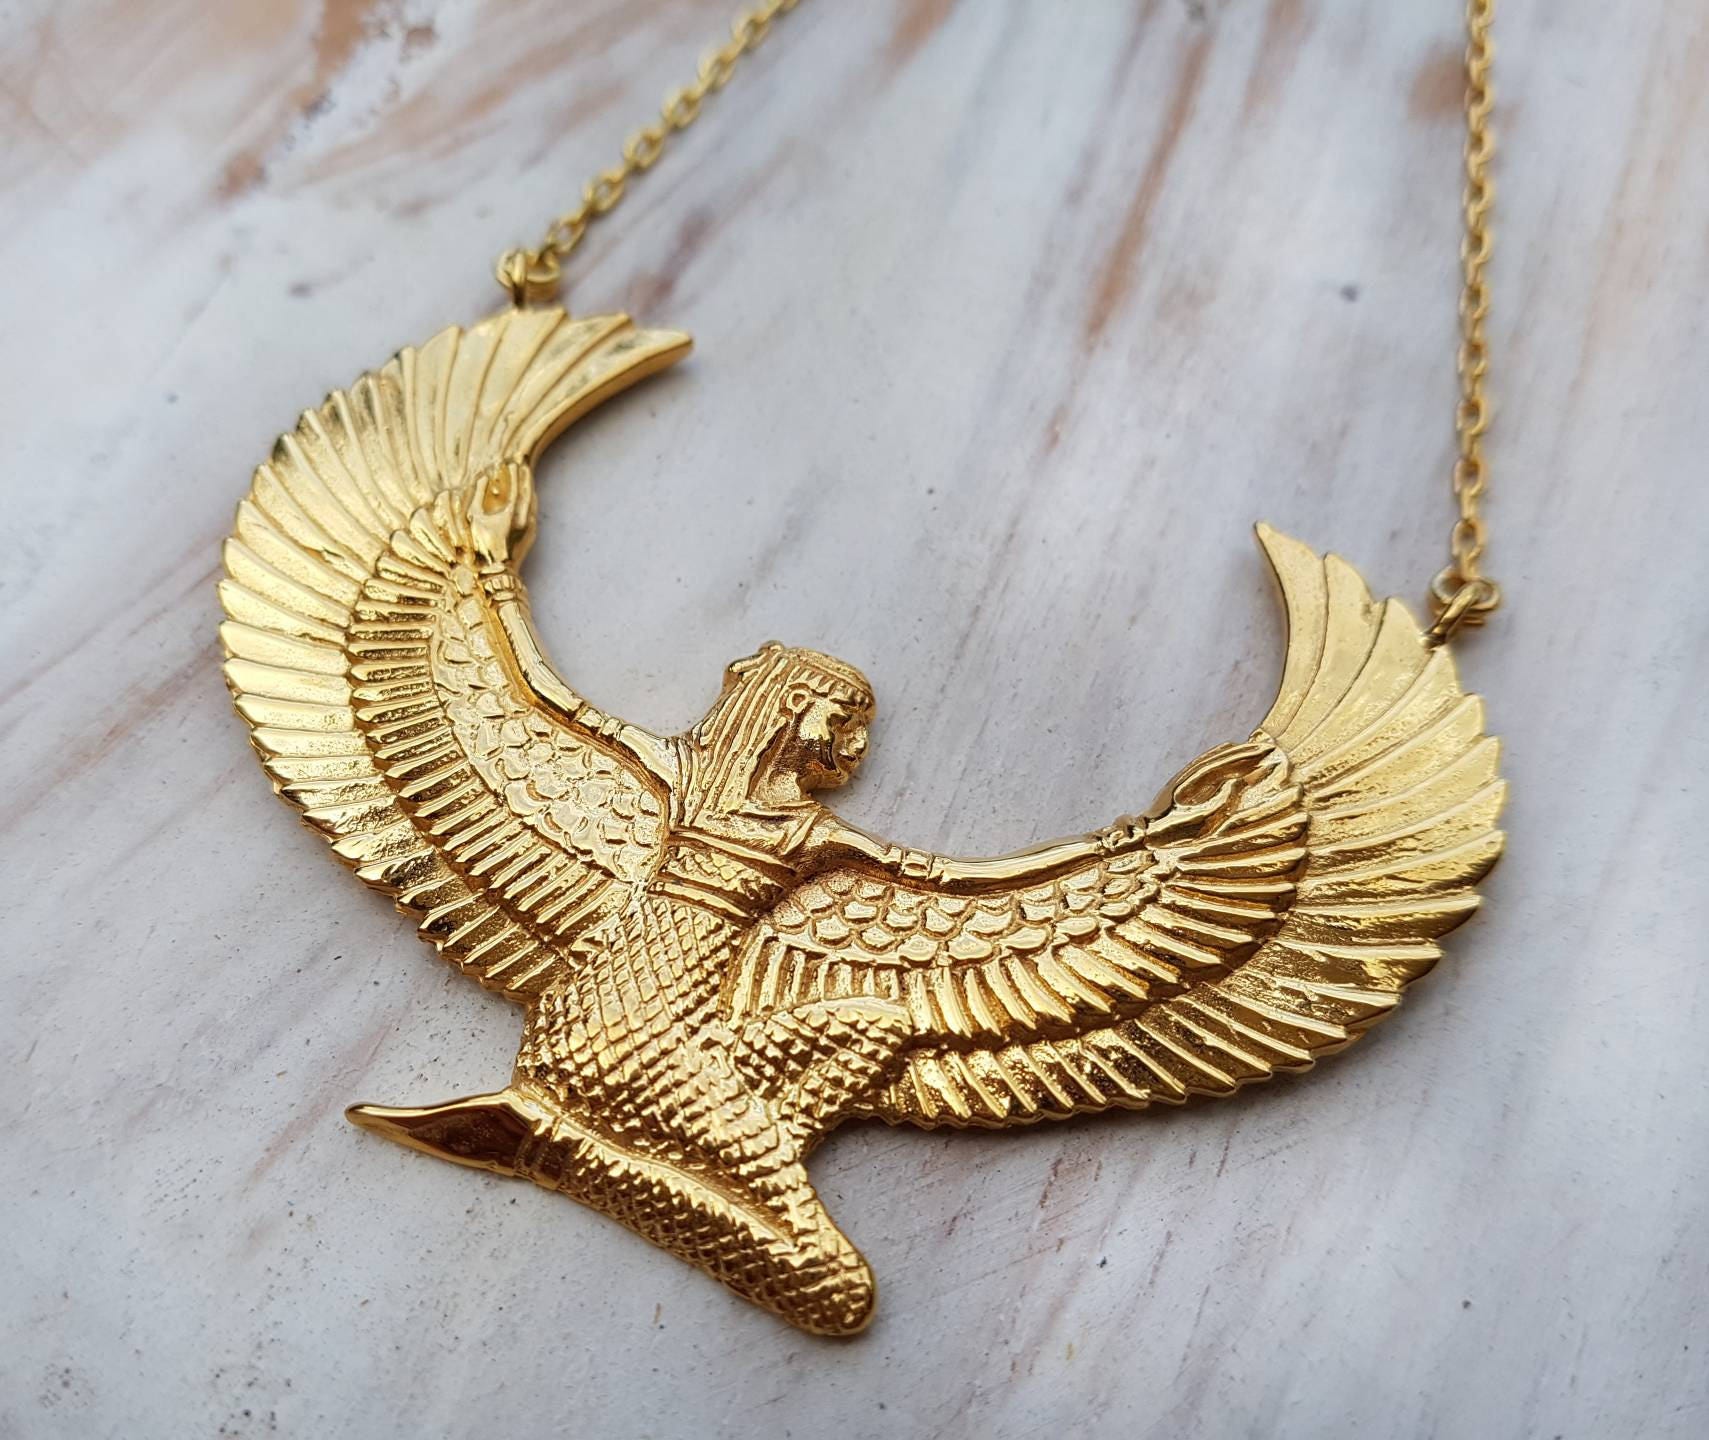 24Ct Gold Dipped Auset Ma'at Egyptian Goddess Isis Necklace - Medium